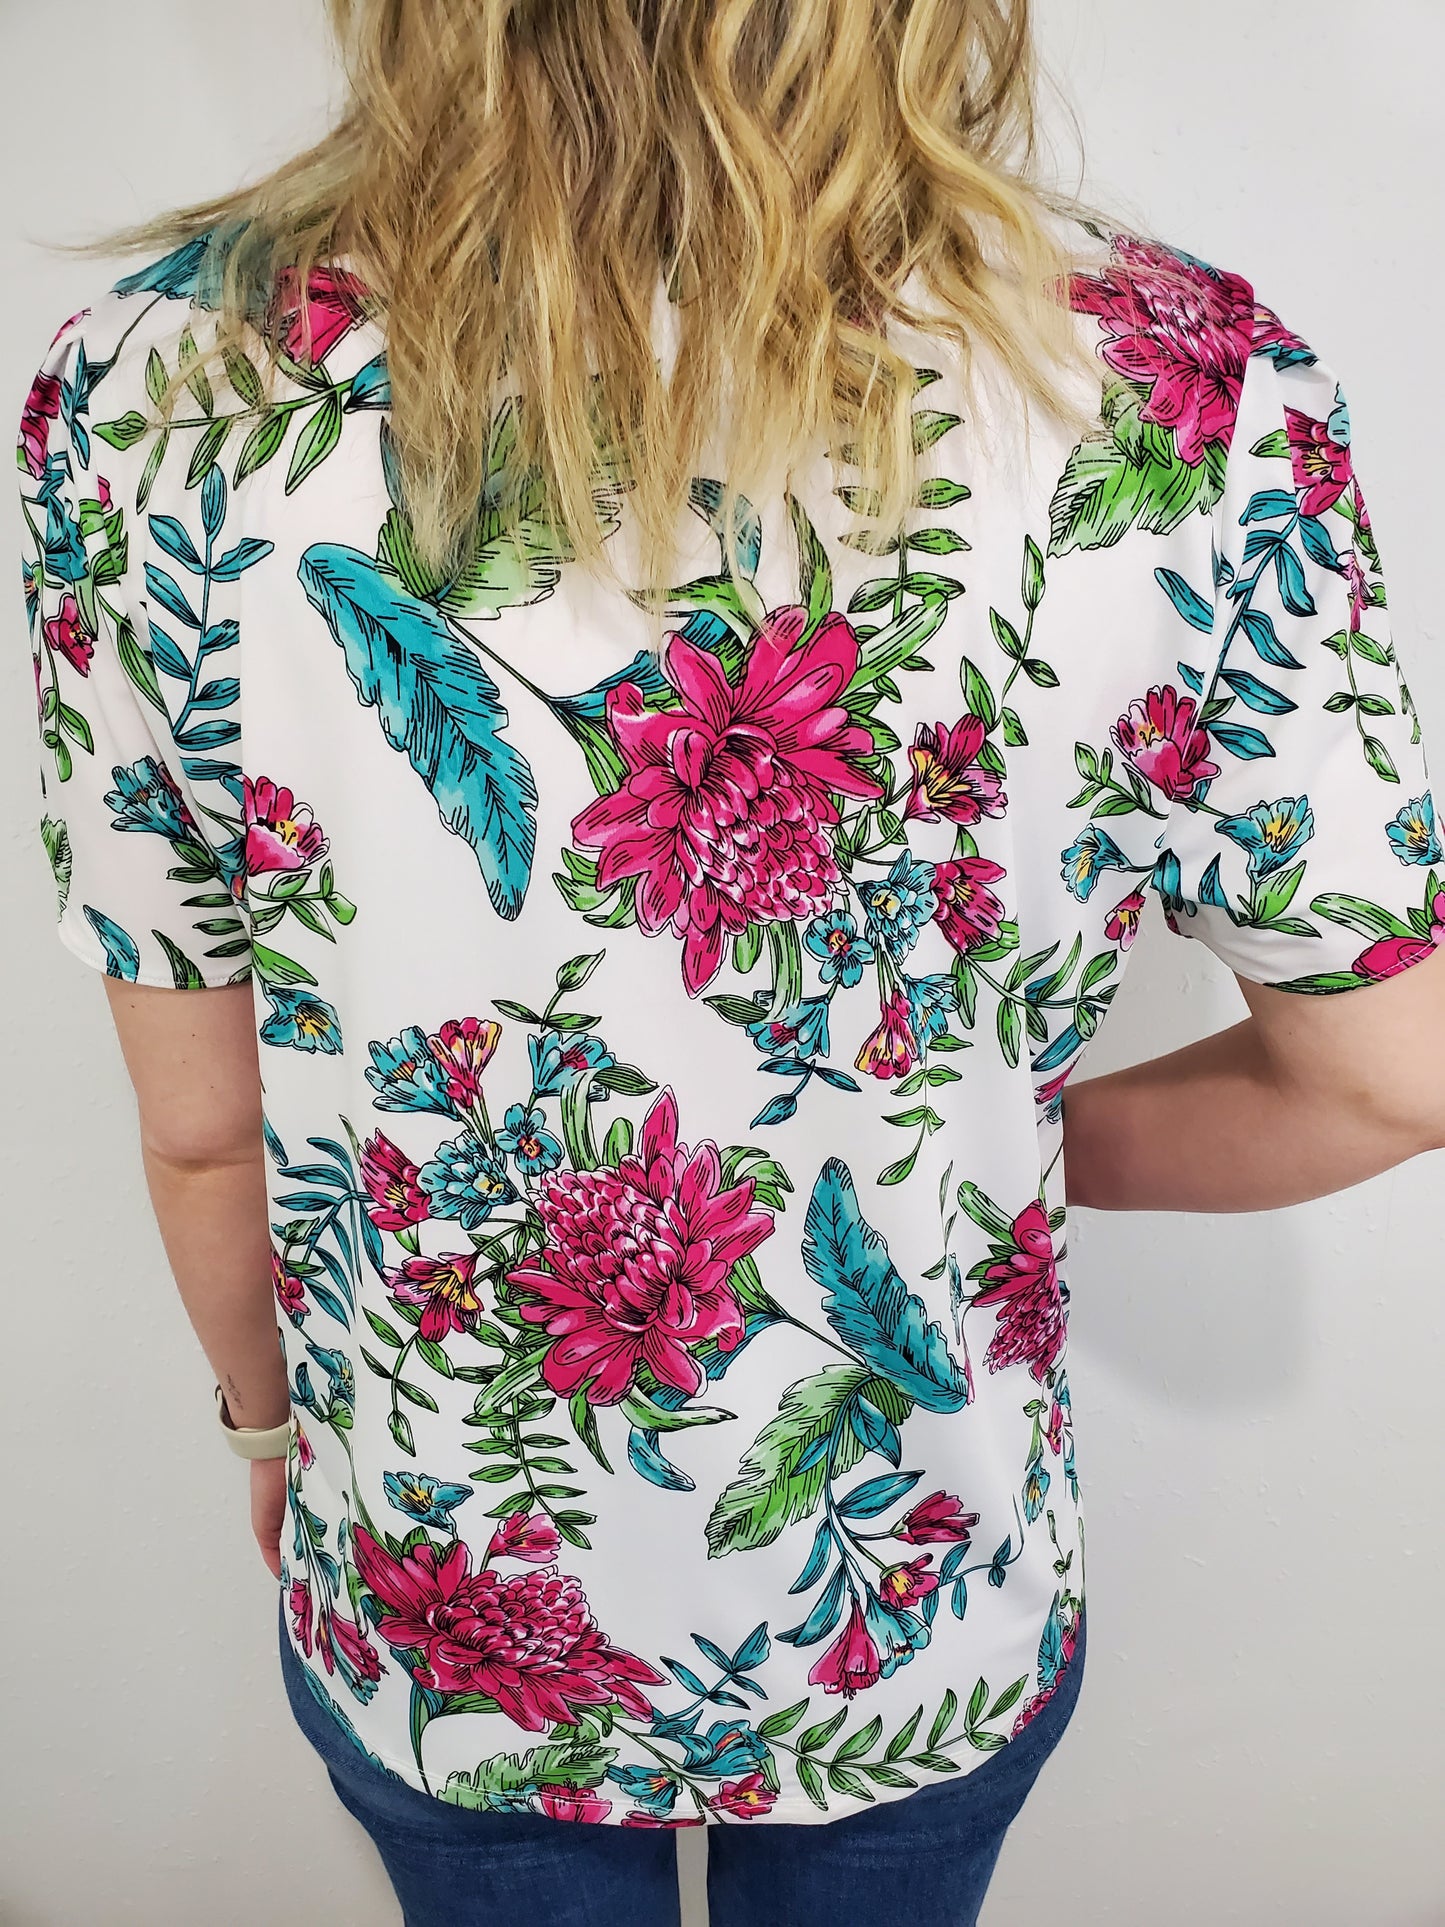 ISLE OF PALMS FLORAL TOP - WHITE PINK MULTI